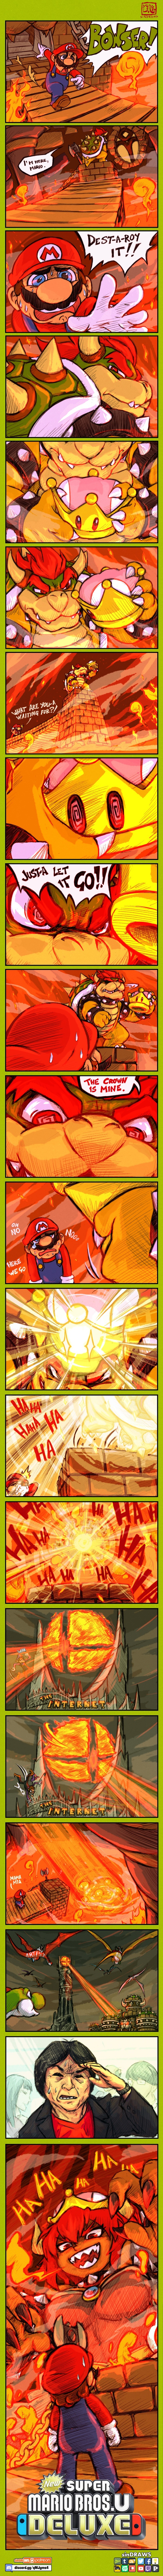 It's a Bowsette comic, I swear - , Comics, Games, Mario, Lord of the Rings, Bowsette, Super crown, Crossover, Longpost